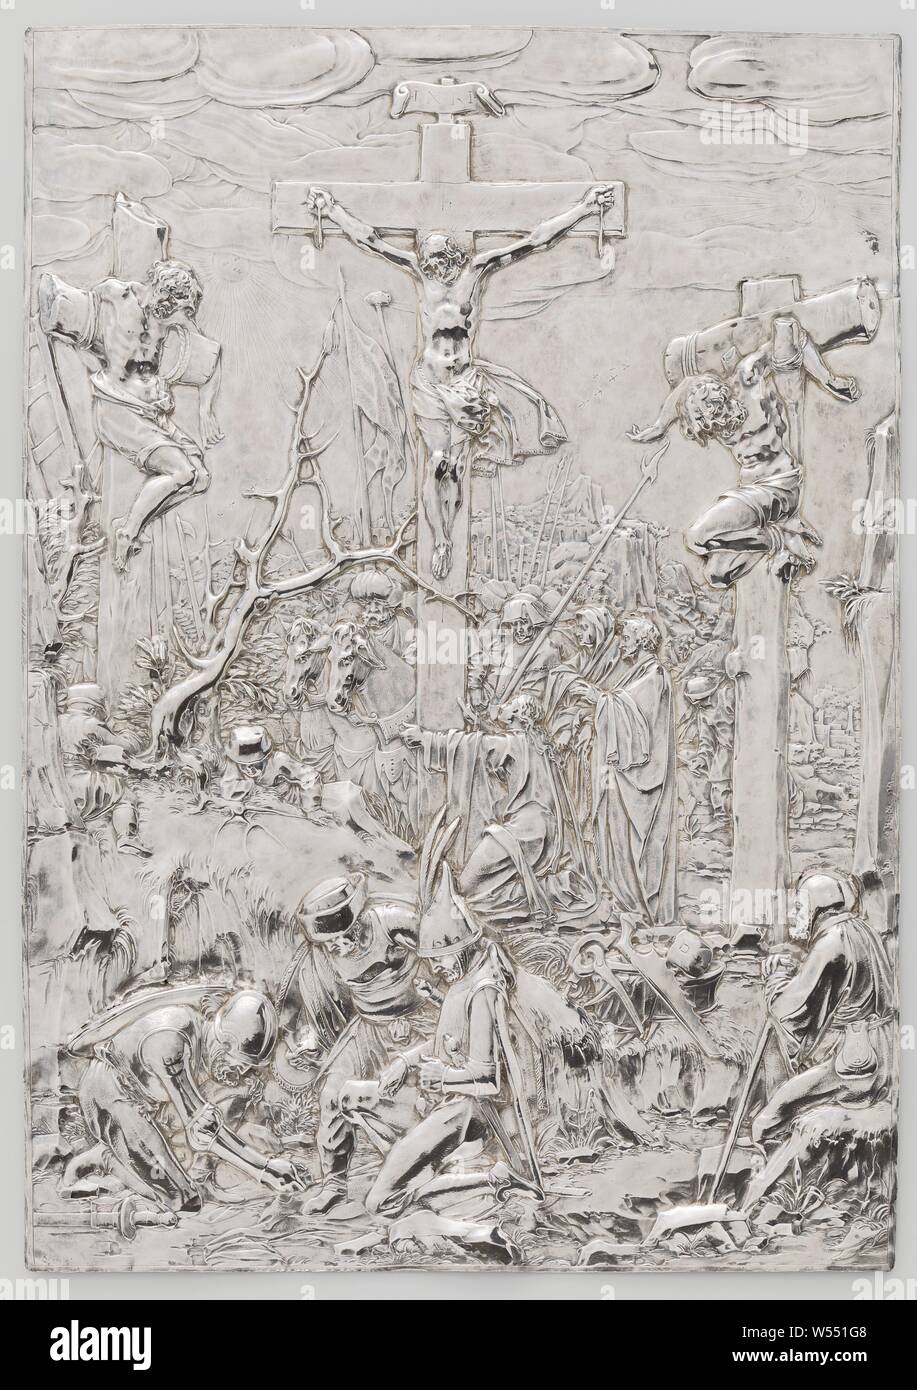 The Crucifixion, Crucifixion, A silver driven plaque with a depiction of the Crucifixion. Christ on the cross in the middle. At the foot of the cross is Mary Magdalene kneeling, on the right are Mary and John, crucified Christ, with particular persons under the cross - DD - the three crosses, soldiers throwing dice for Christ's seamless garment, Christ's death on the cross, Arent van Bolten (attributed to), c. 1610, silver (metal), h 28.9 cm × w 20.4 cm × t 0.9 cm × w 294 Stock Photo